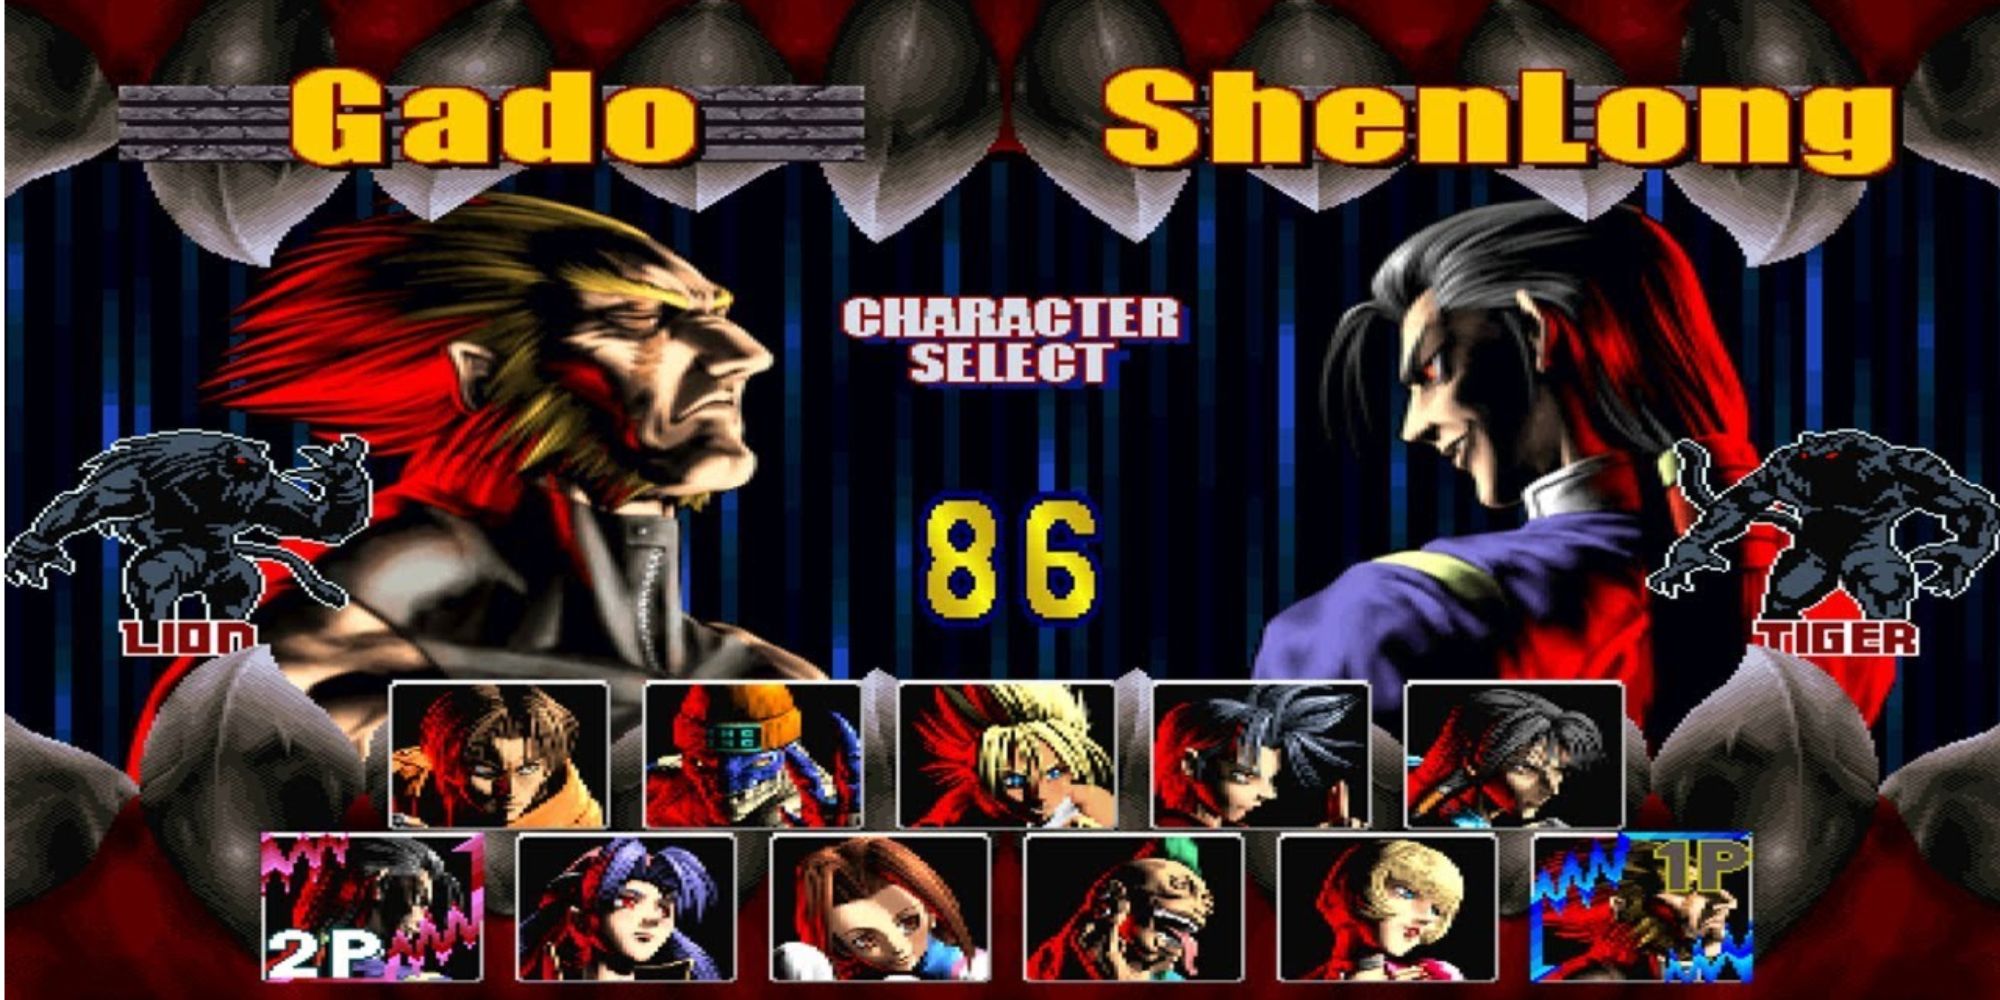 Bloody Roar was like an Animorphs fighting game